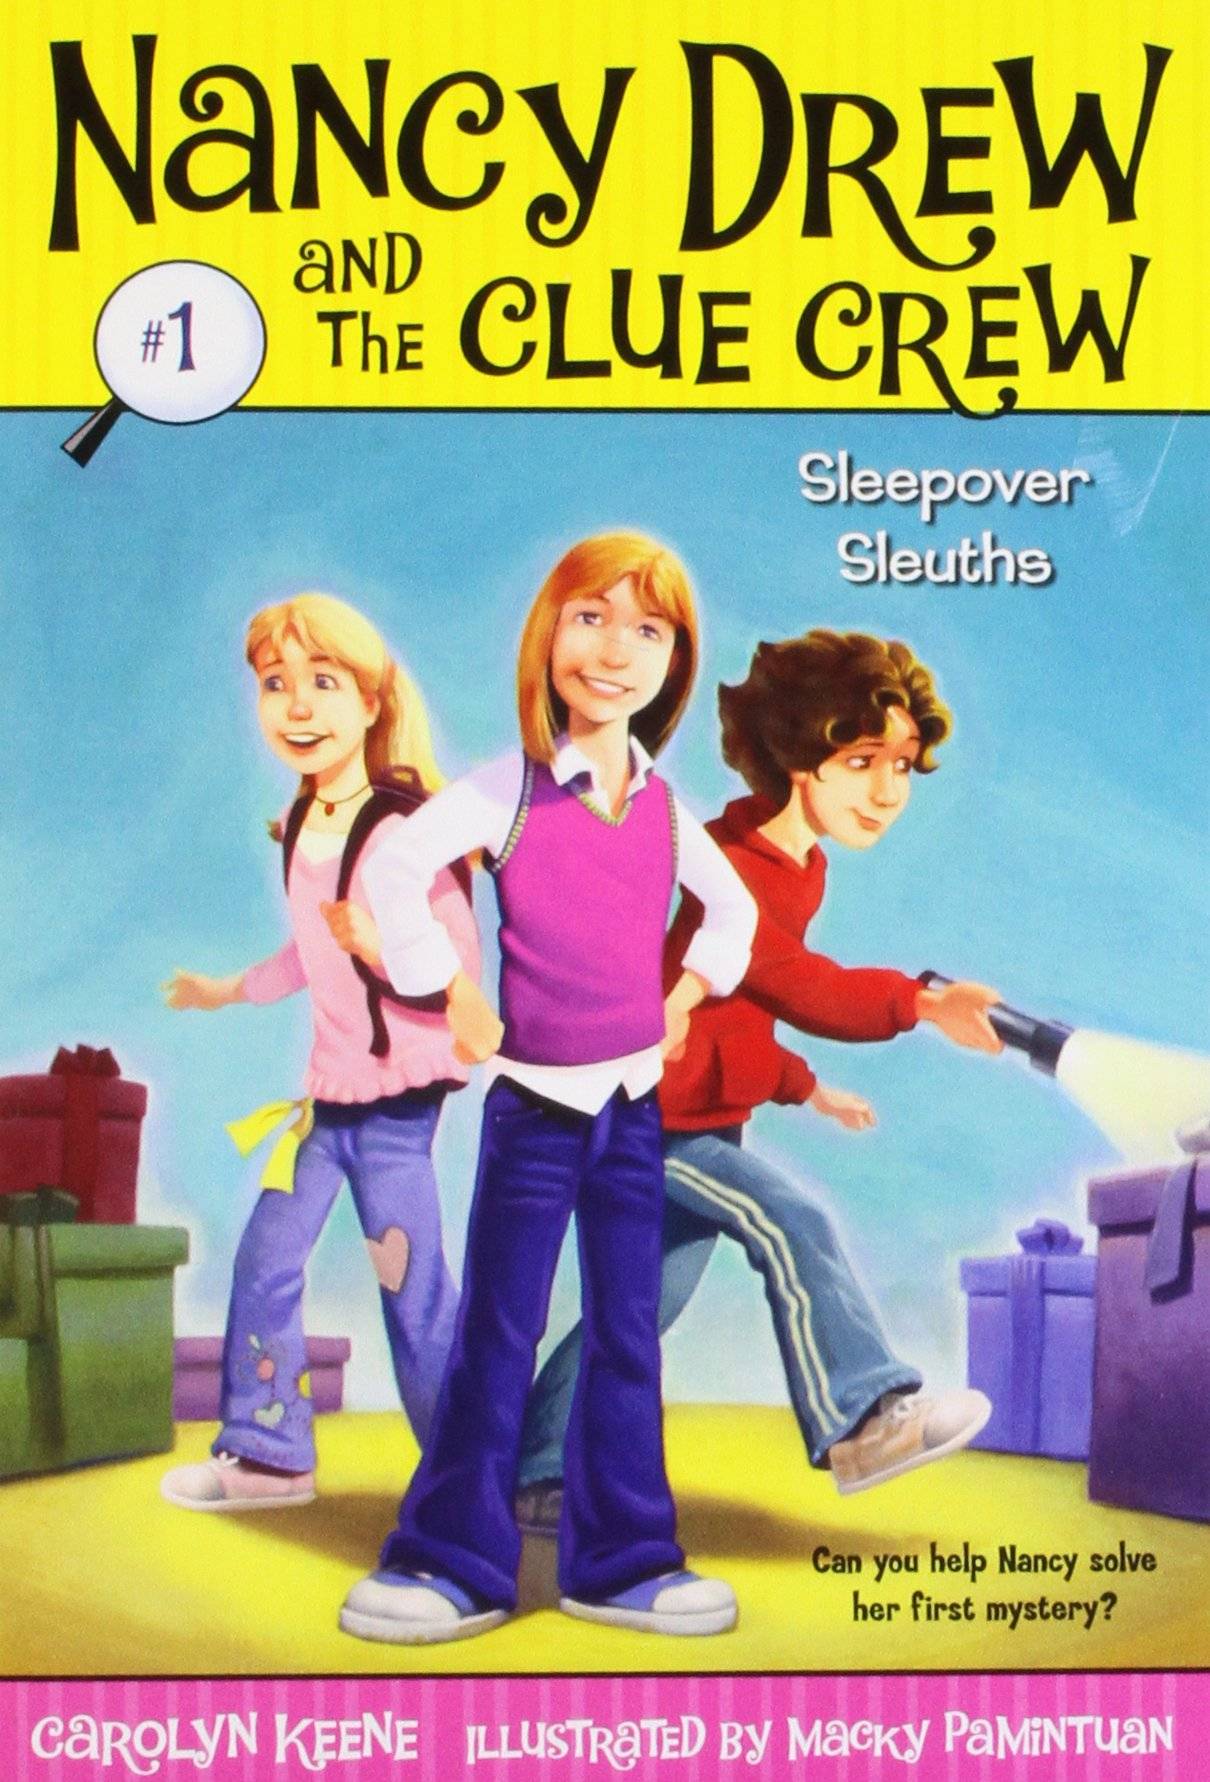 IMG : The Nancy Drew and the Clue Crew  Sleepover Sleuths #1